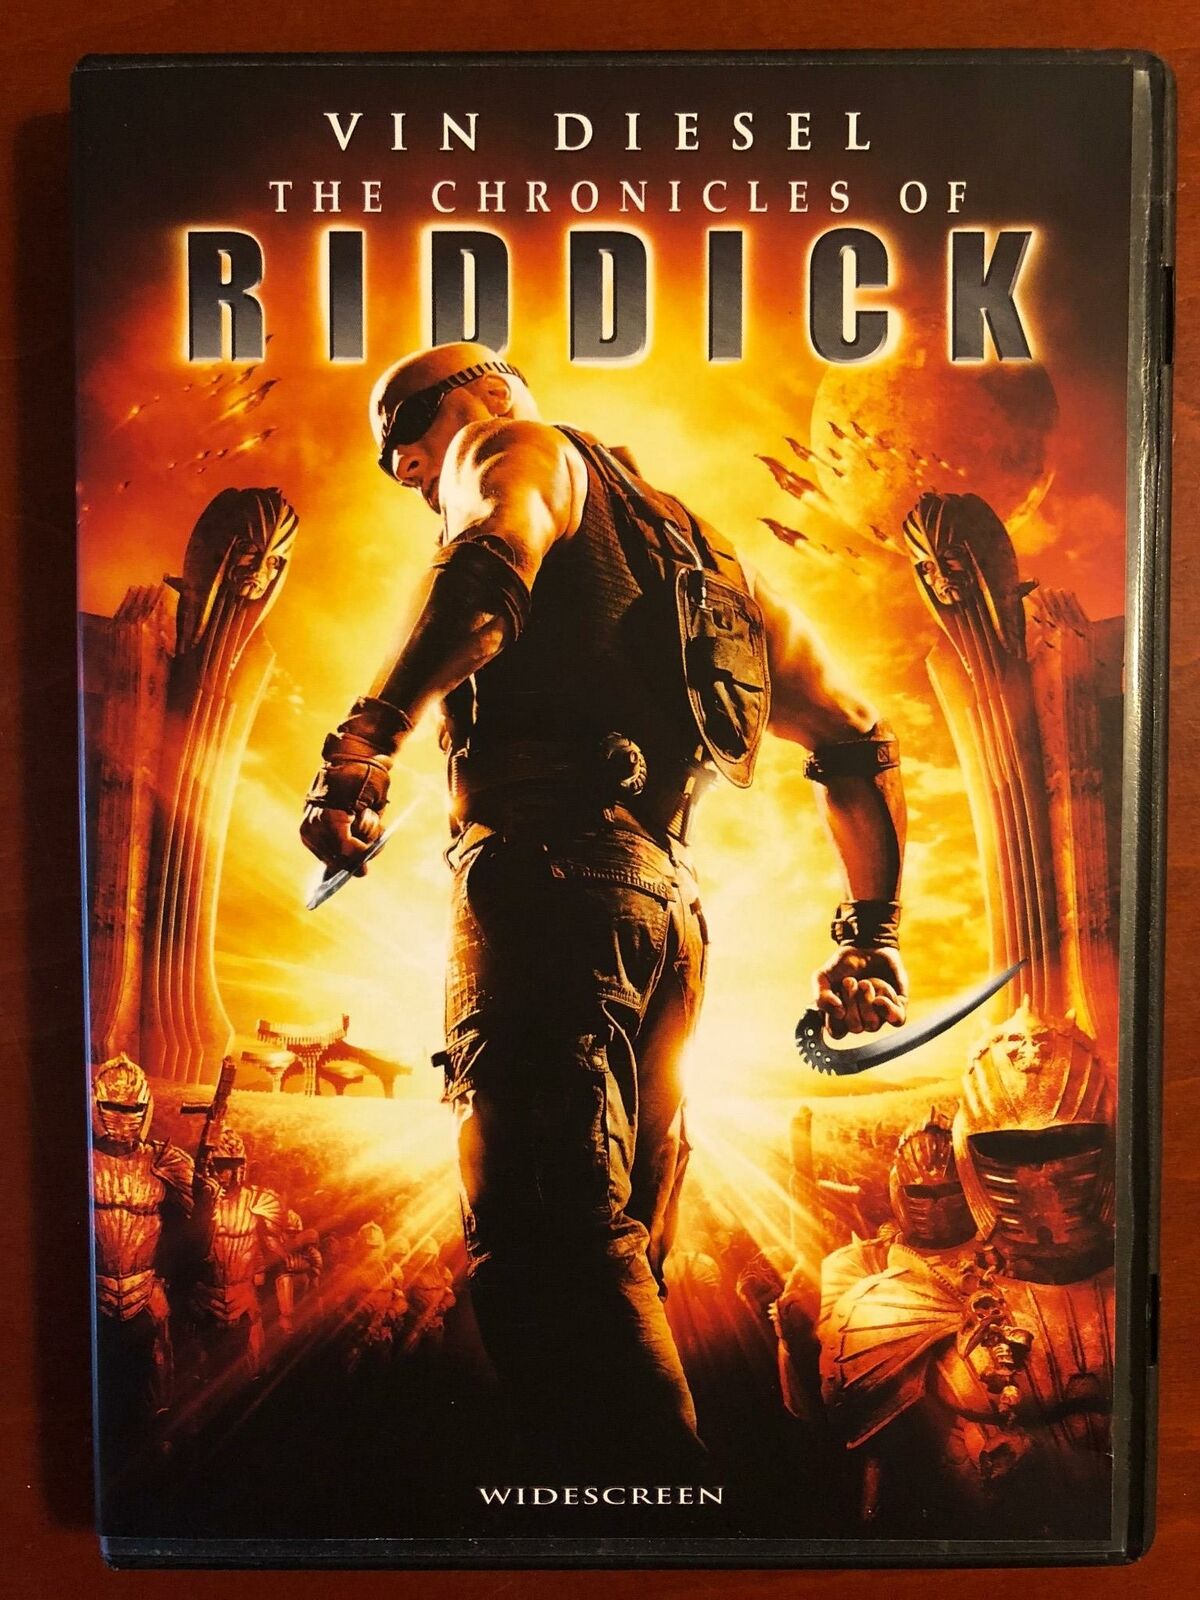 The Chronicles of Riddick (DVD, 2004, Widescreen) - G0906